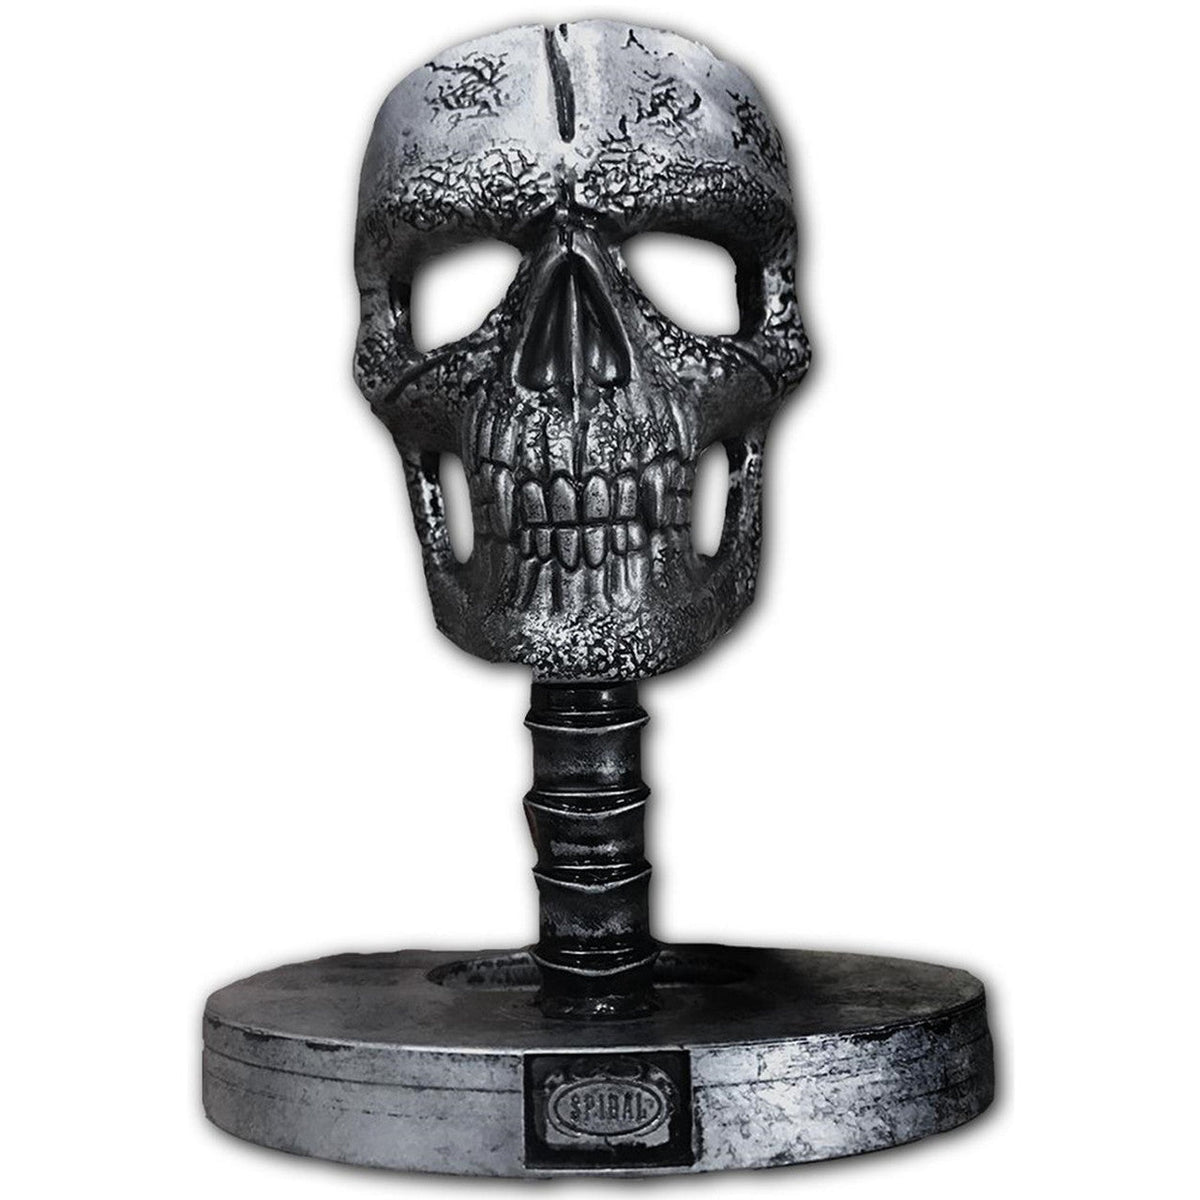 Wax Reaper Scented Candle With Skull Sculpture-Candles-Scarlett Dawn